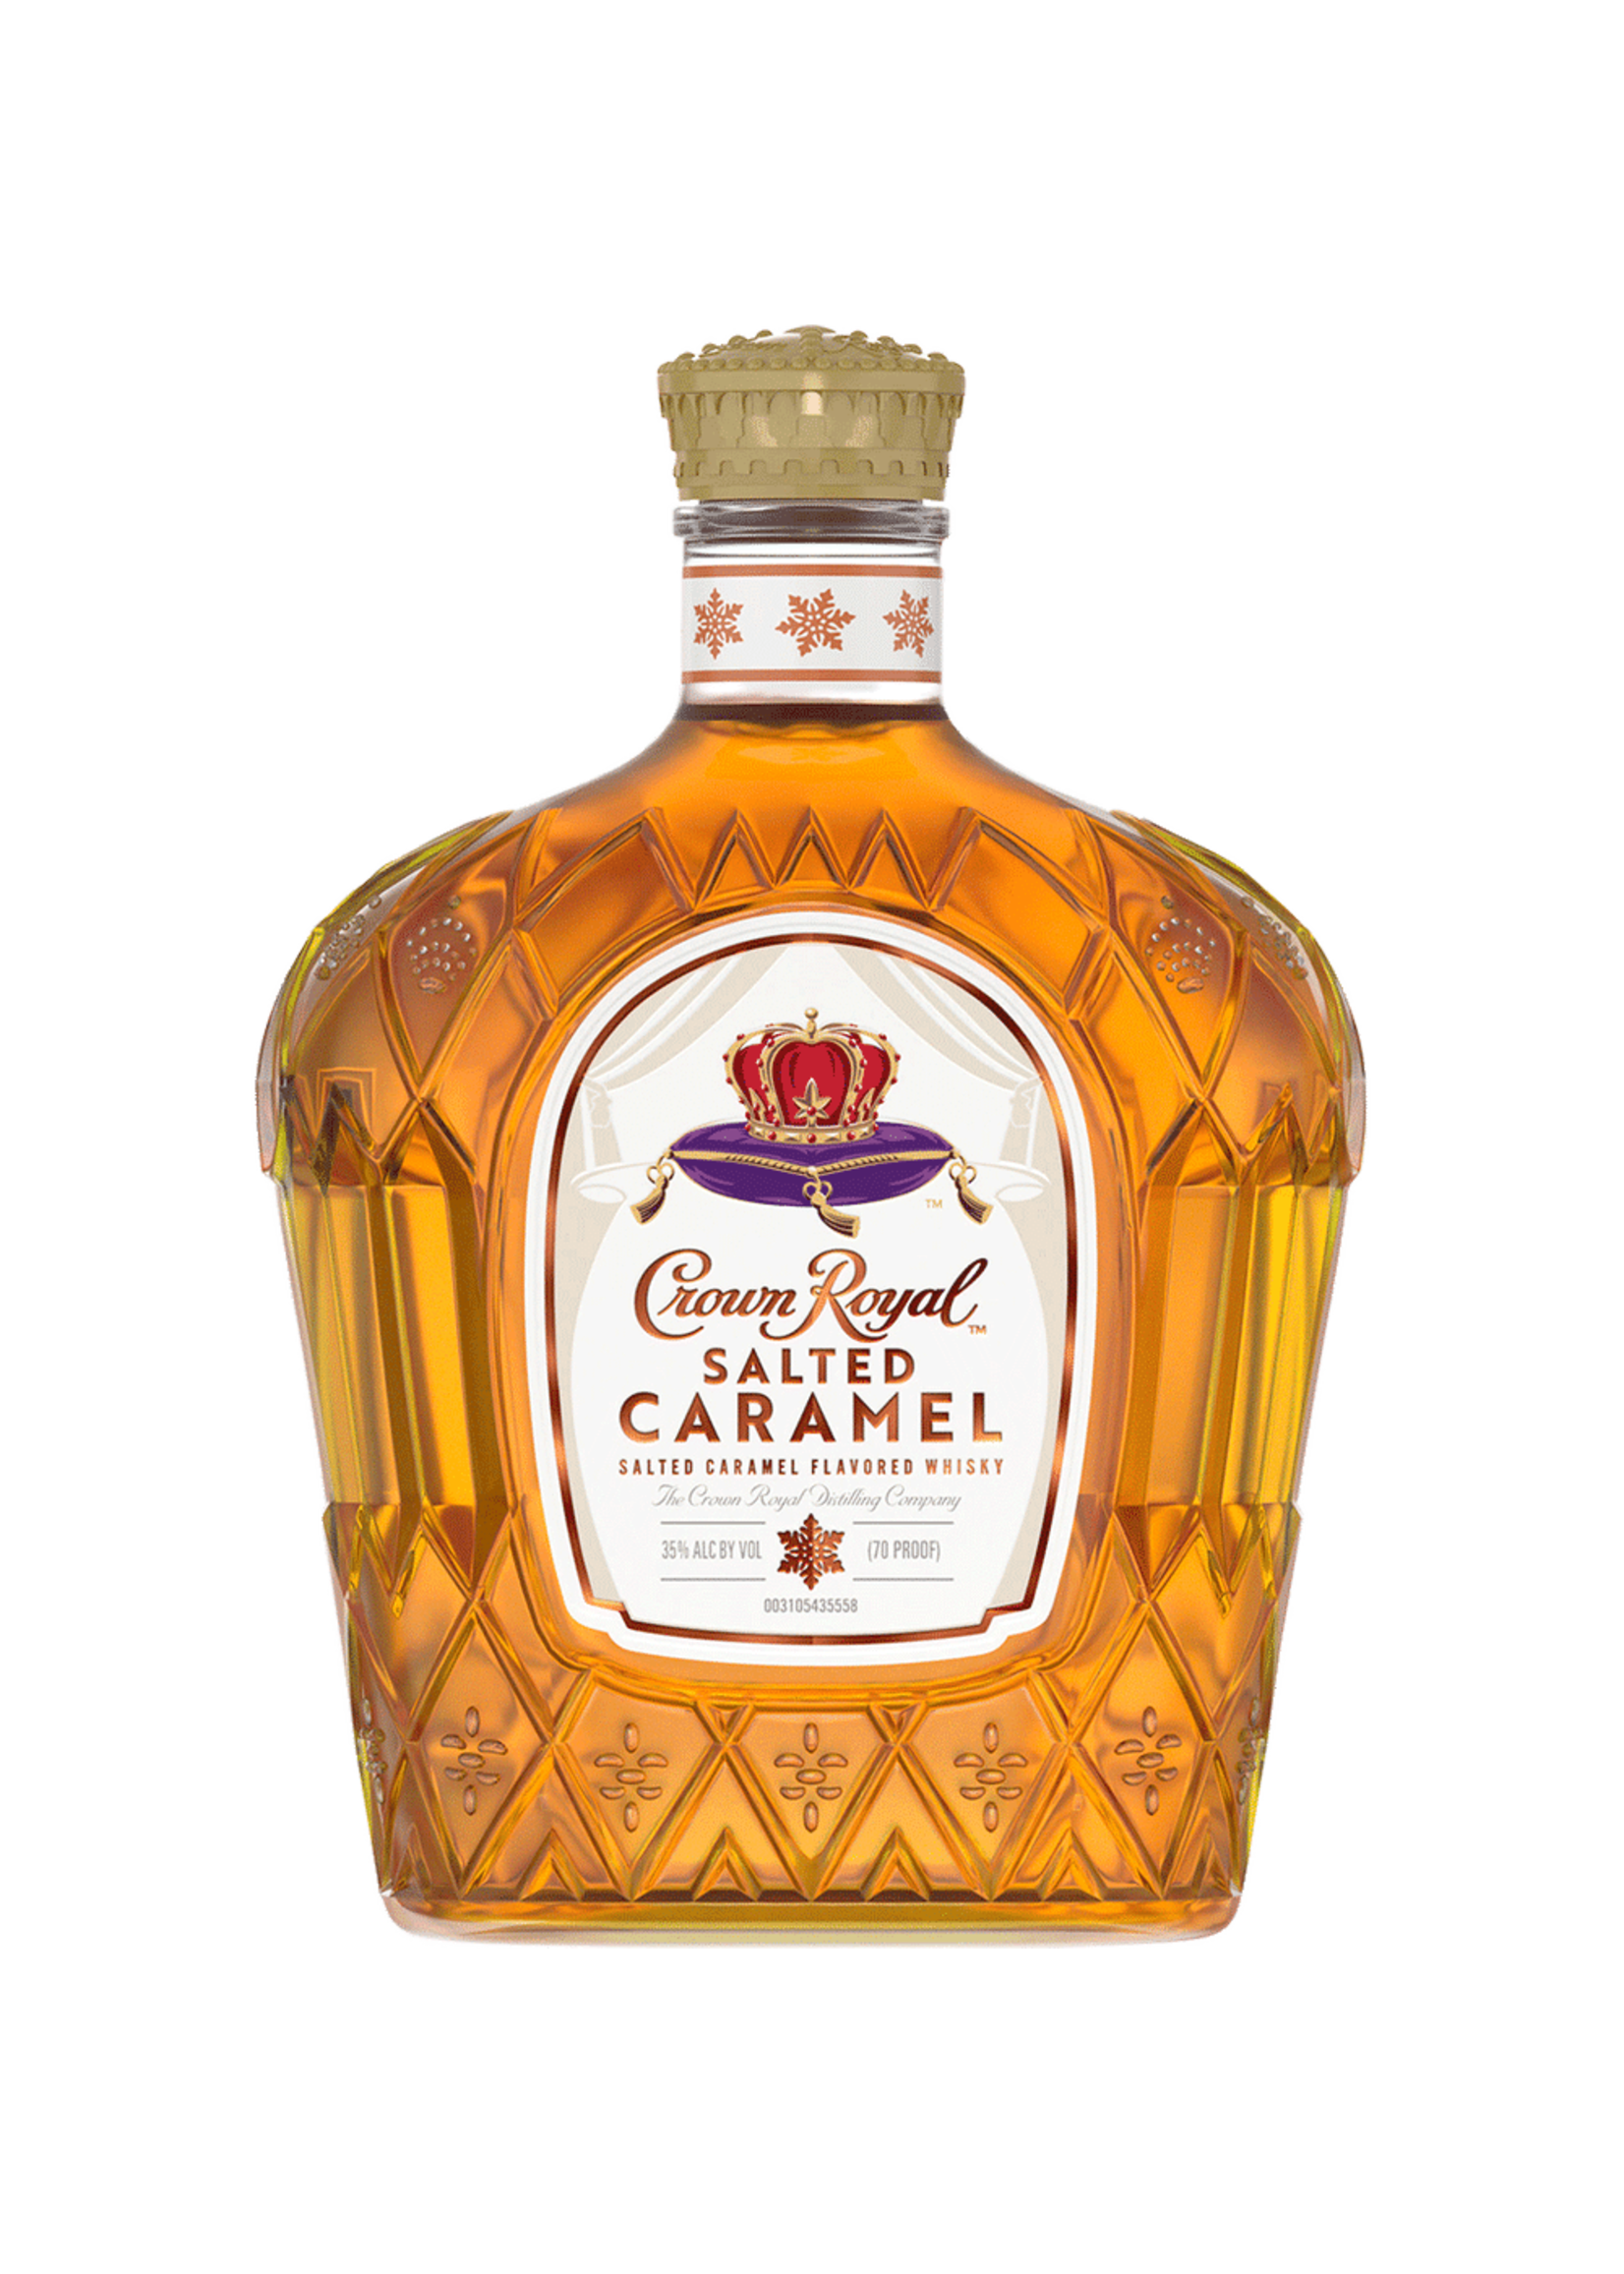 Crown Royal Salted Caramel Flavored Whiskey 70Proof 750ml